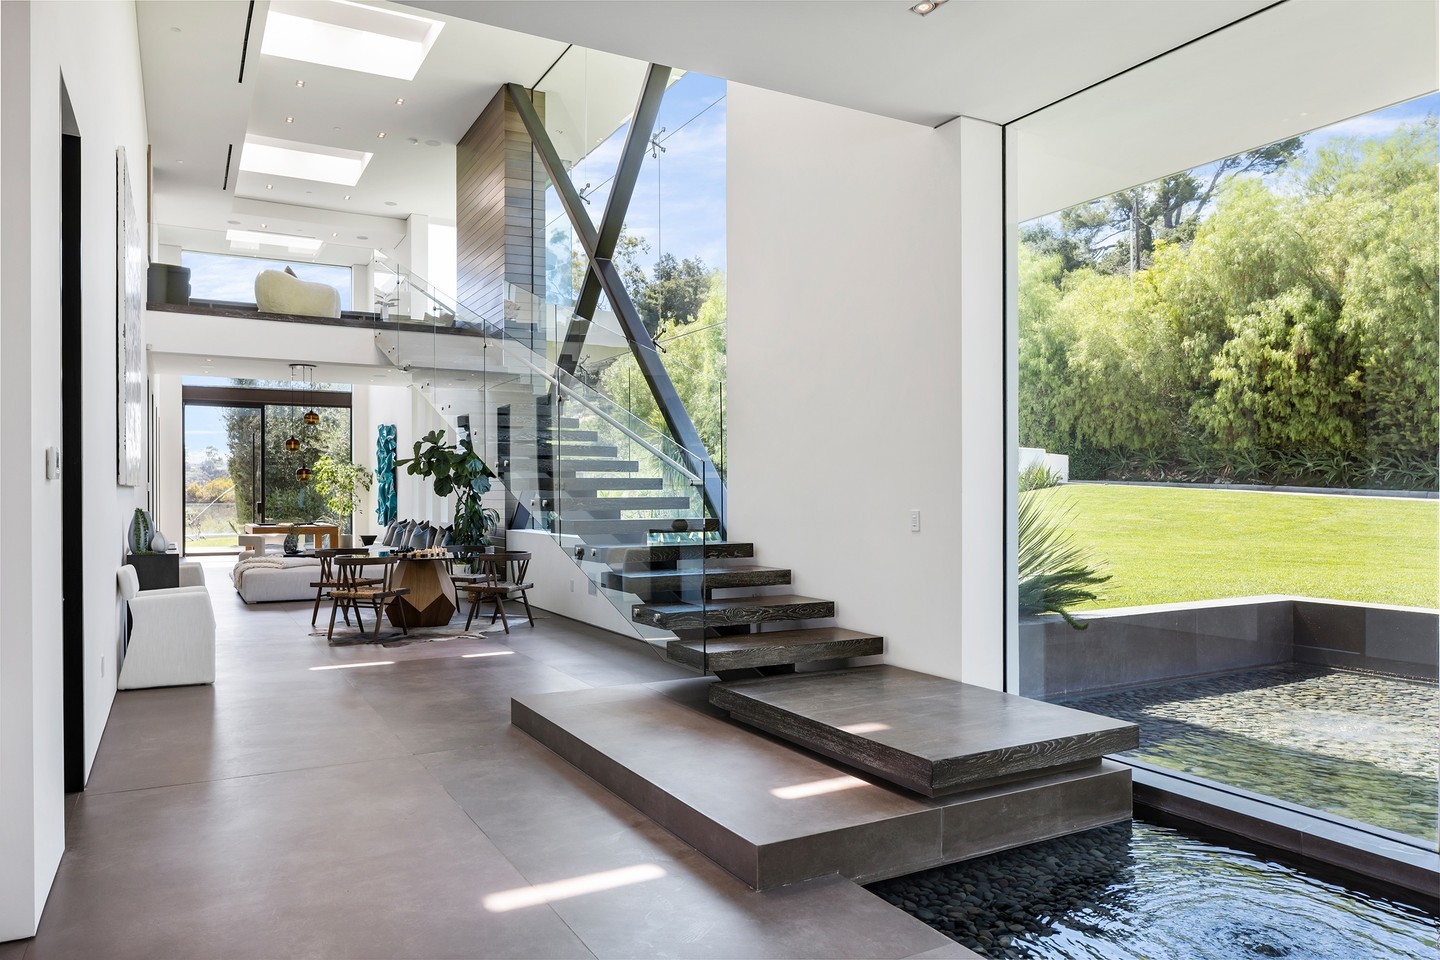 interior stair next to a water pond with large glass openings make this home interior both open and inviting